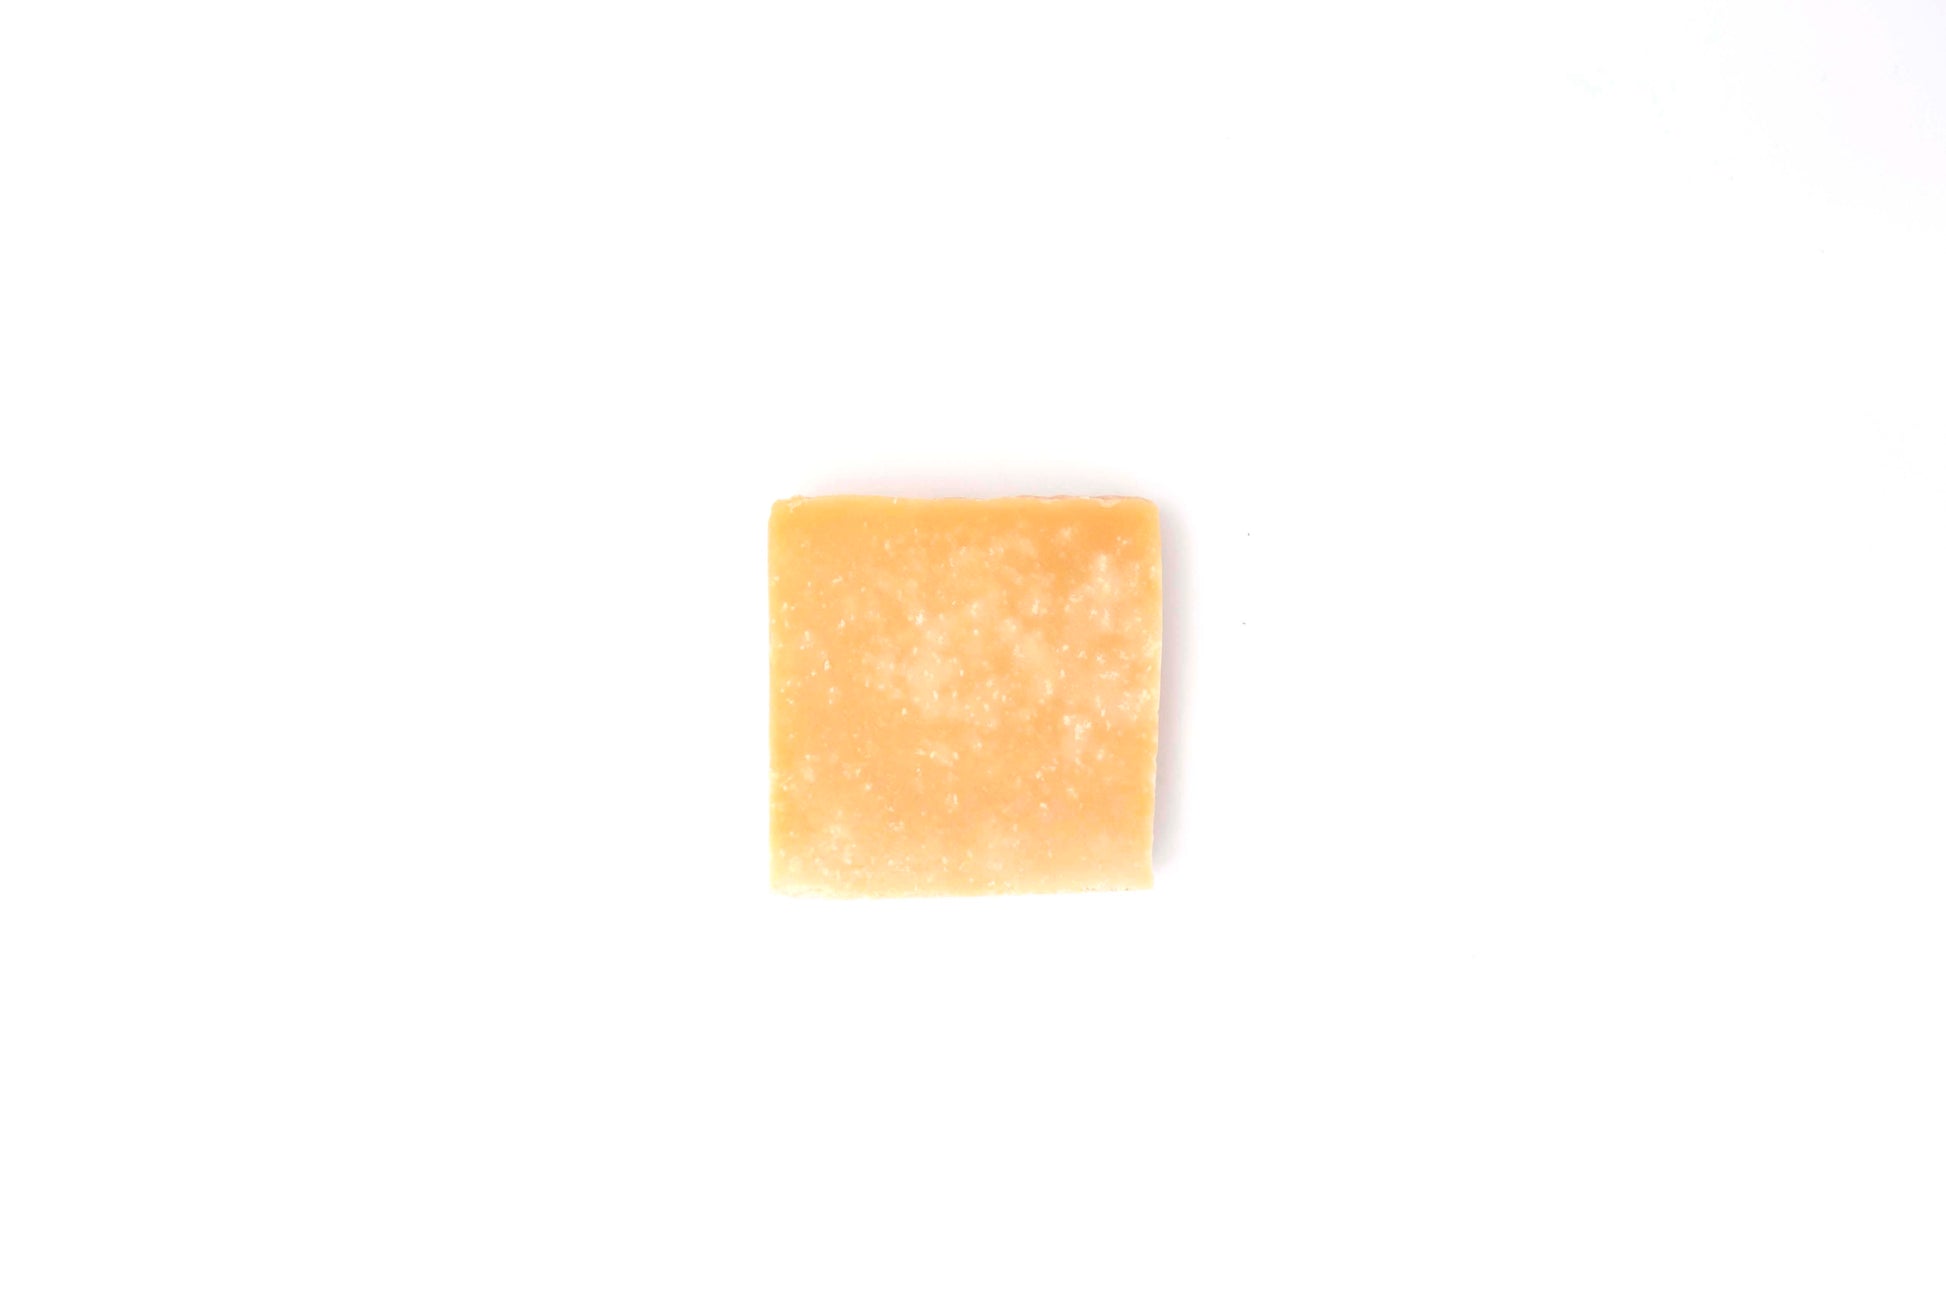 Rich yellow Lemon Sea Salt Soap bar flecked with white salt crystals rests on a clean white backdrop